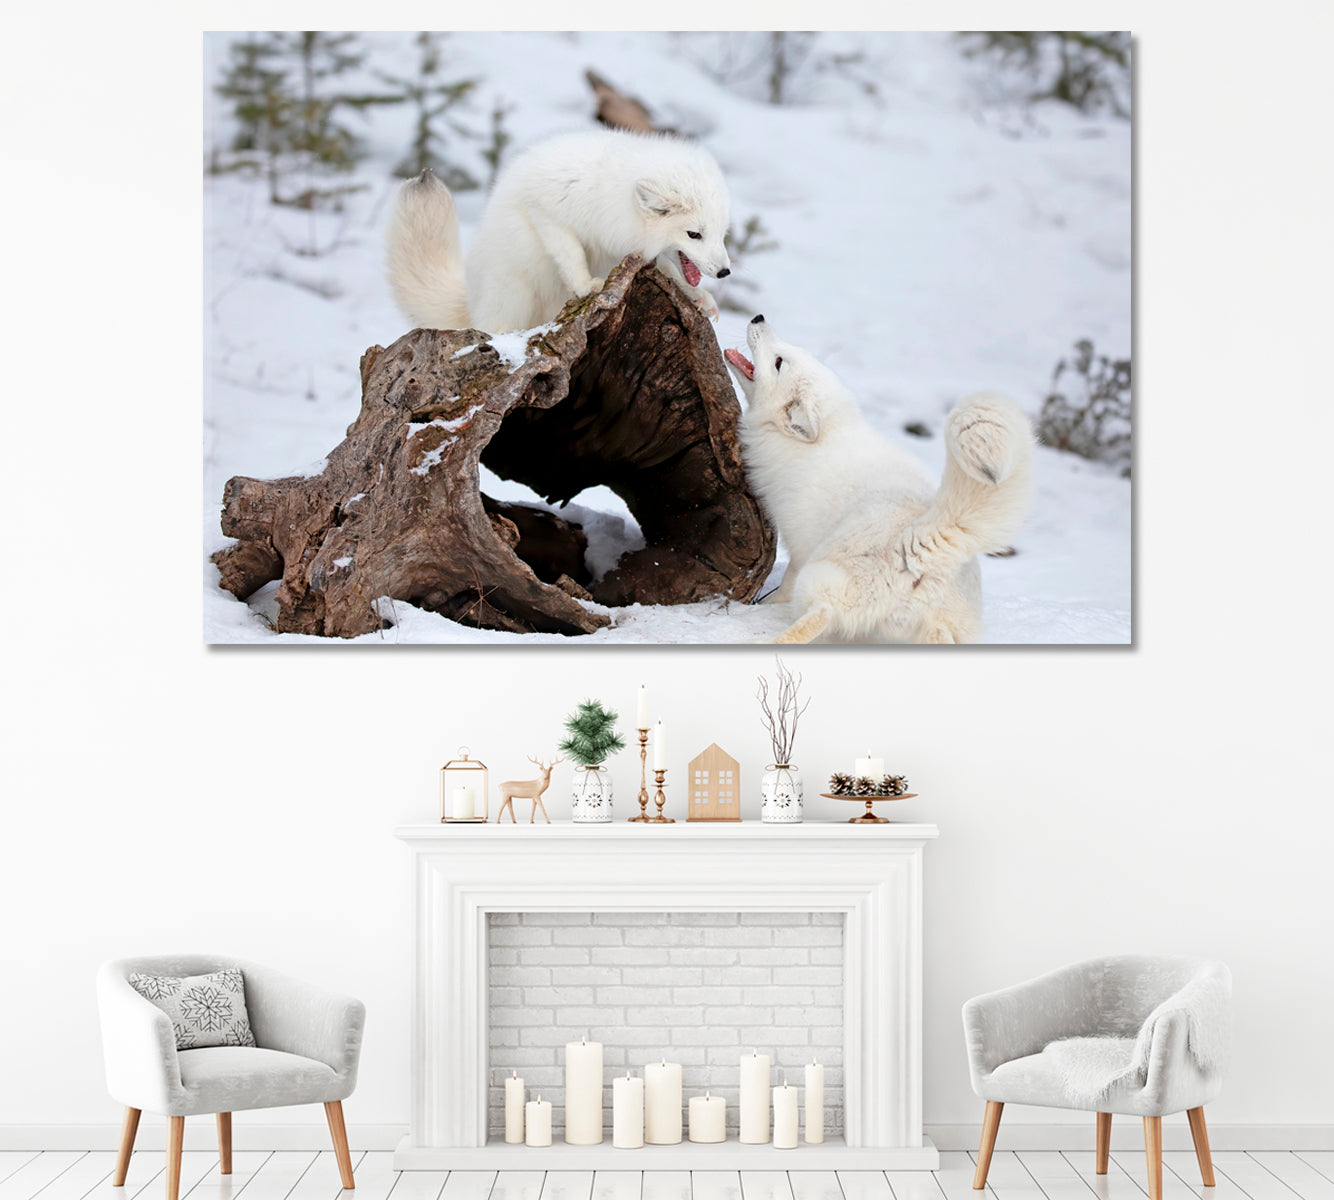 Two Arctic Fox Playing in Snow Montana USA Canvas Print ArtLexy 1 Panel 24"x16" inches 